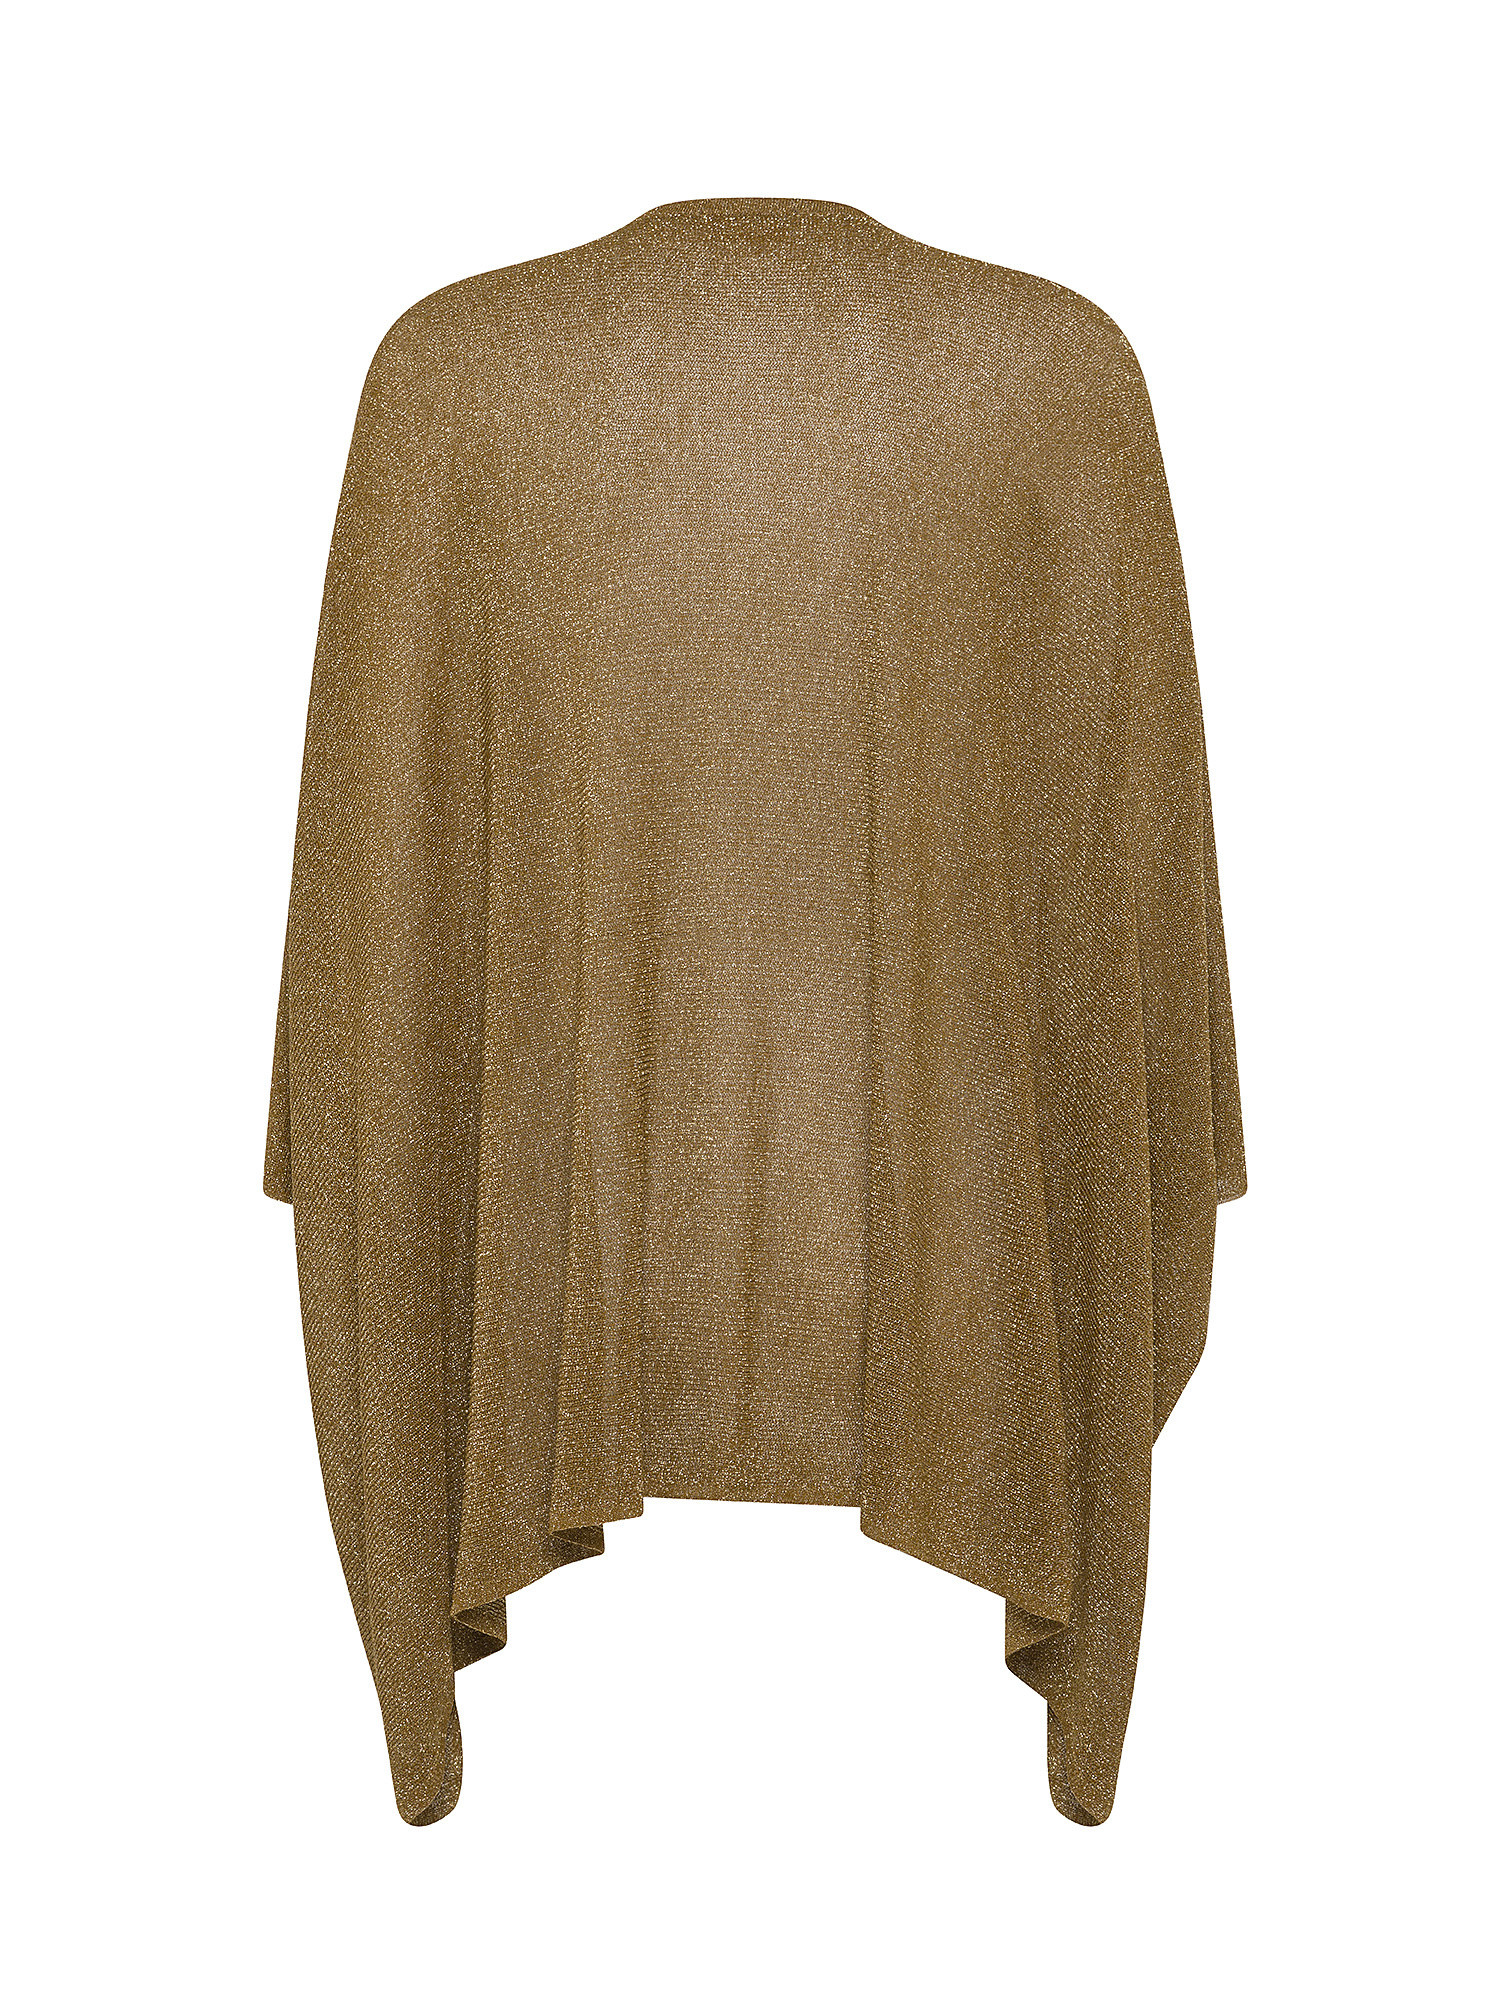 Momonì - Divina cardigan in viscose and lurex, Olive Green, large image number 1